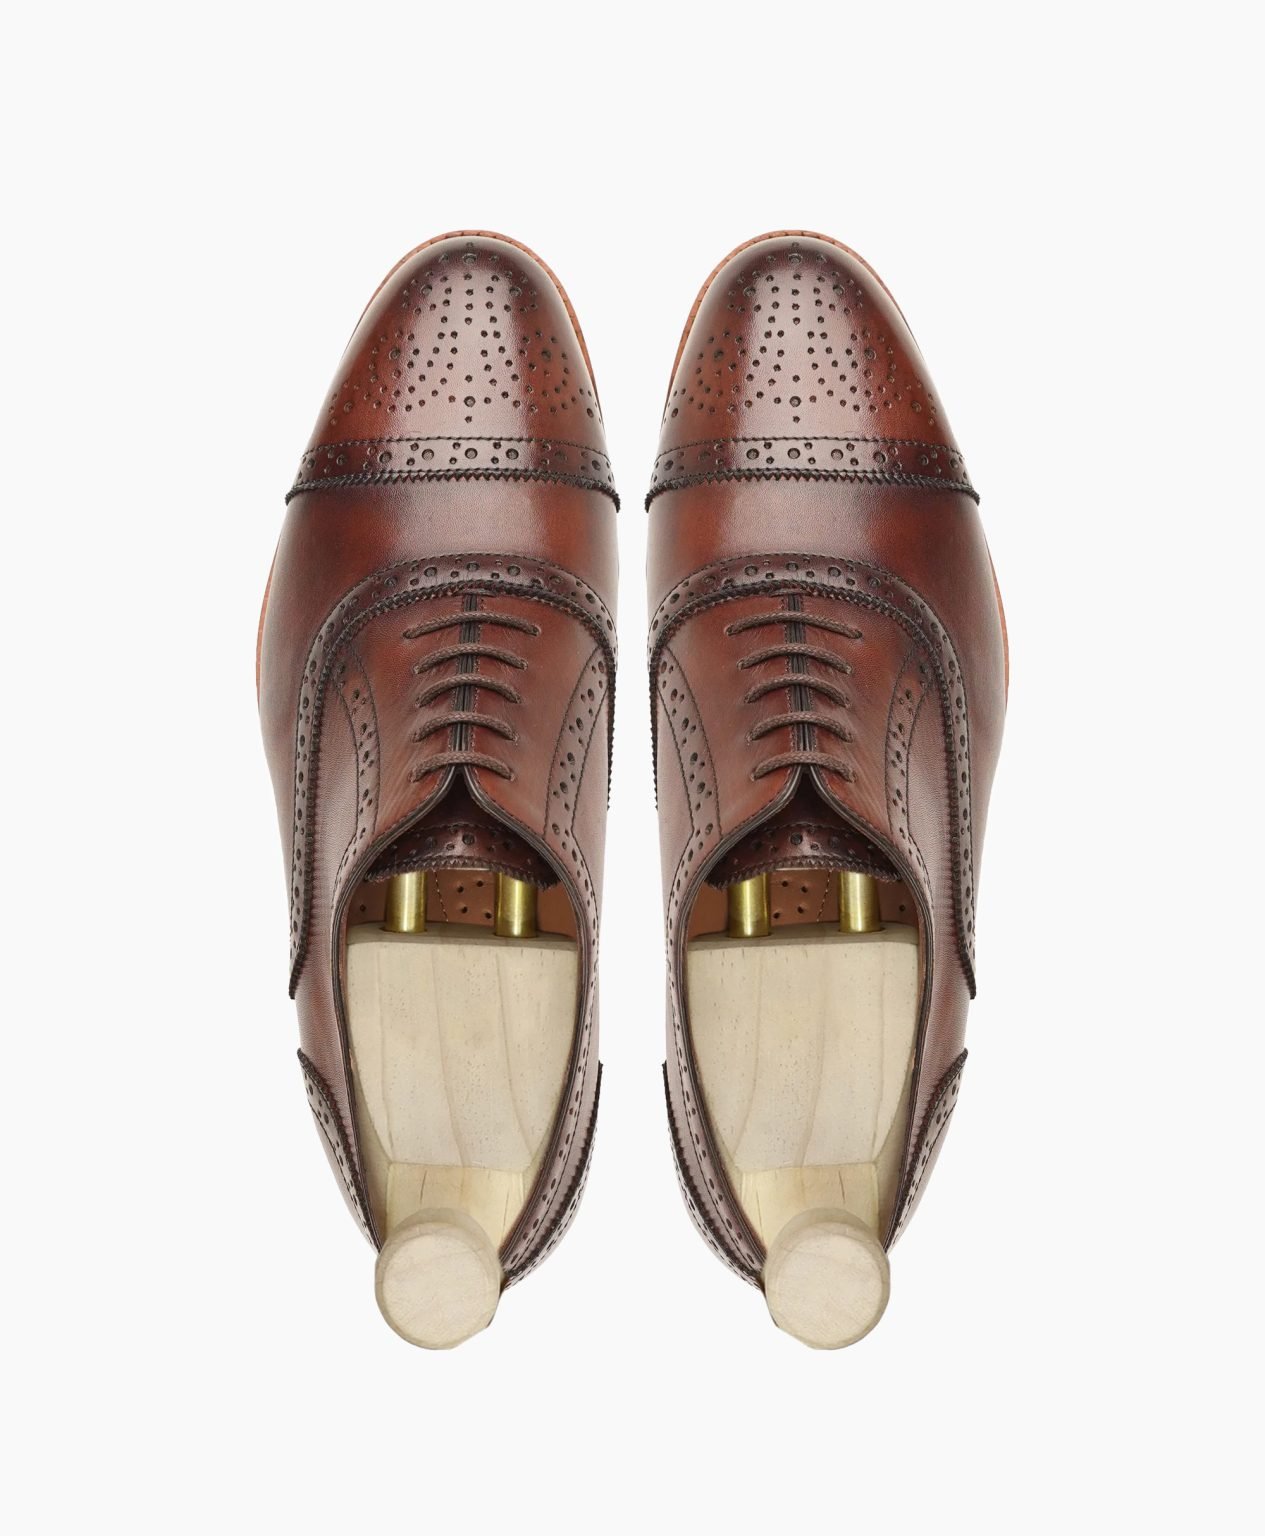 penzance-oxford-brown-leather-shoes-image202